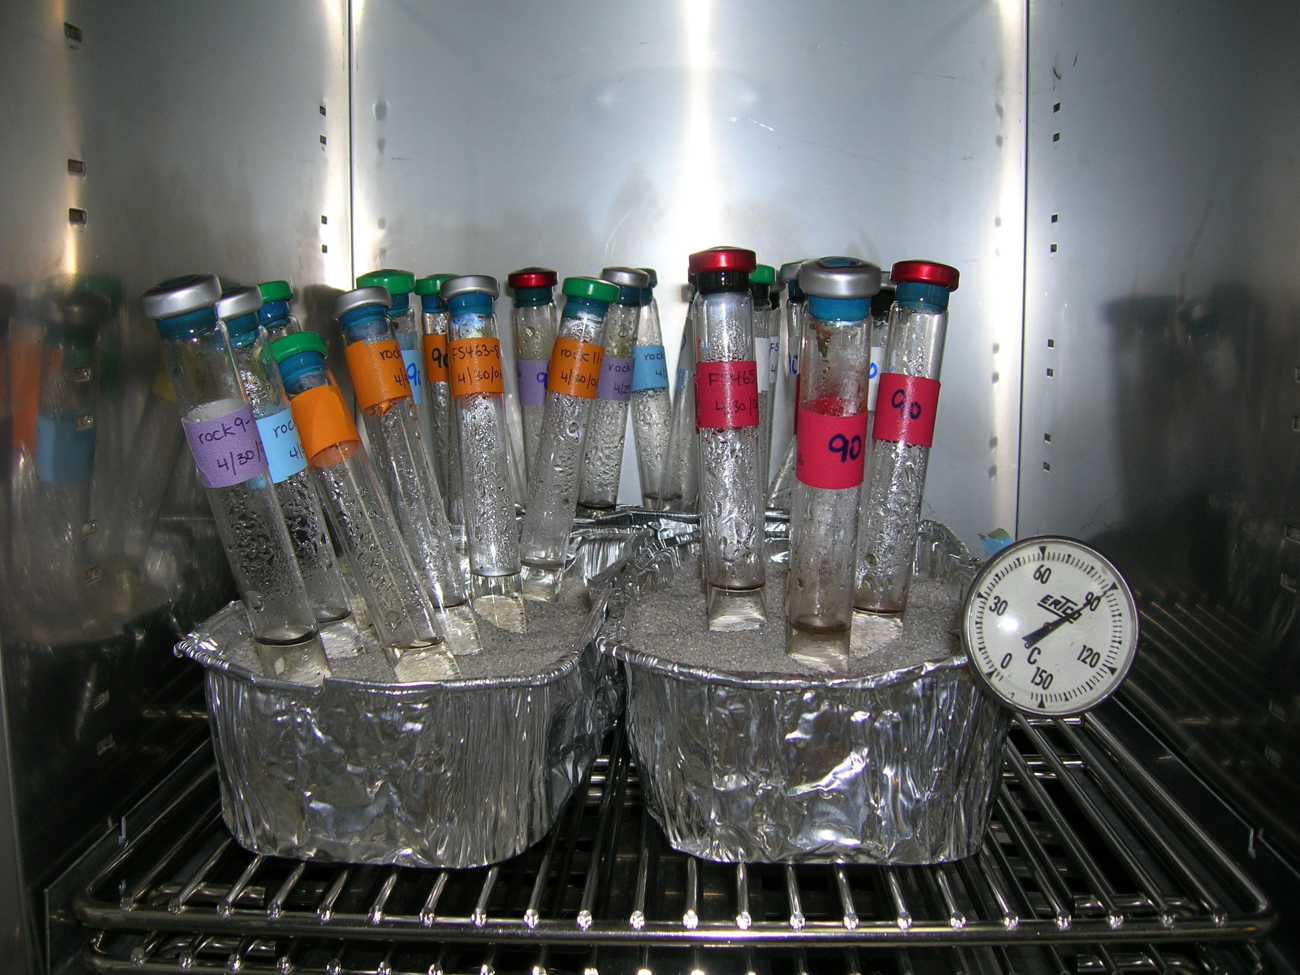 Samples collected in the vicinity of hydrothermal vents are incubated at 90degrees Celsius (195 F), almost boiling temperature, in an attempt to growmicrobes associated with the diverse hydrothermal vent environment